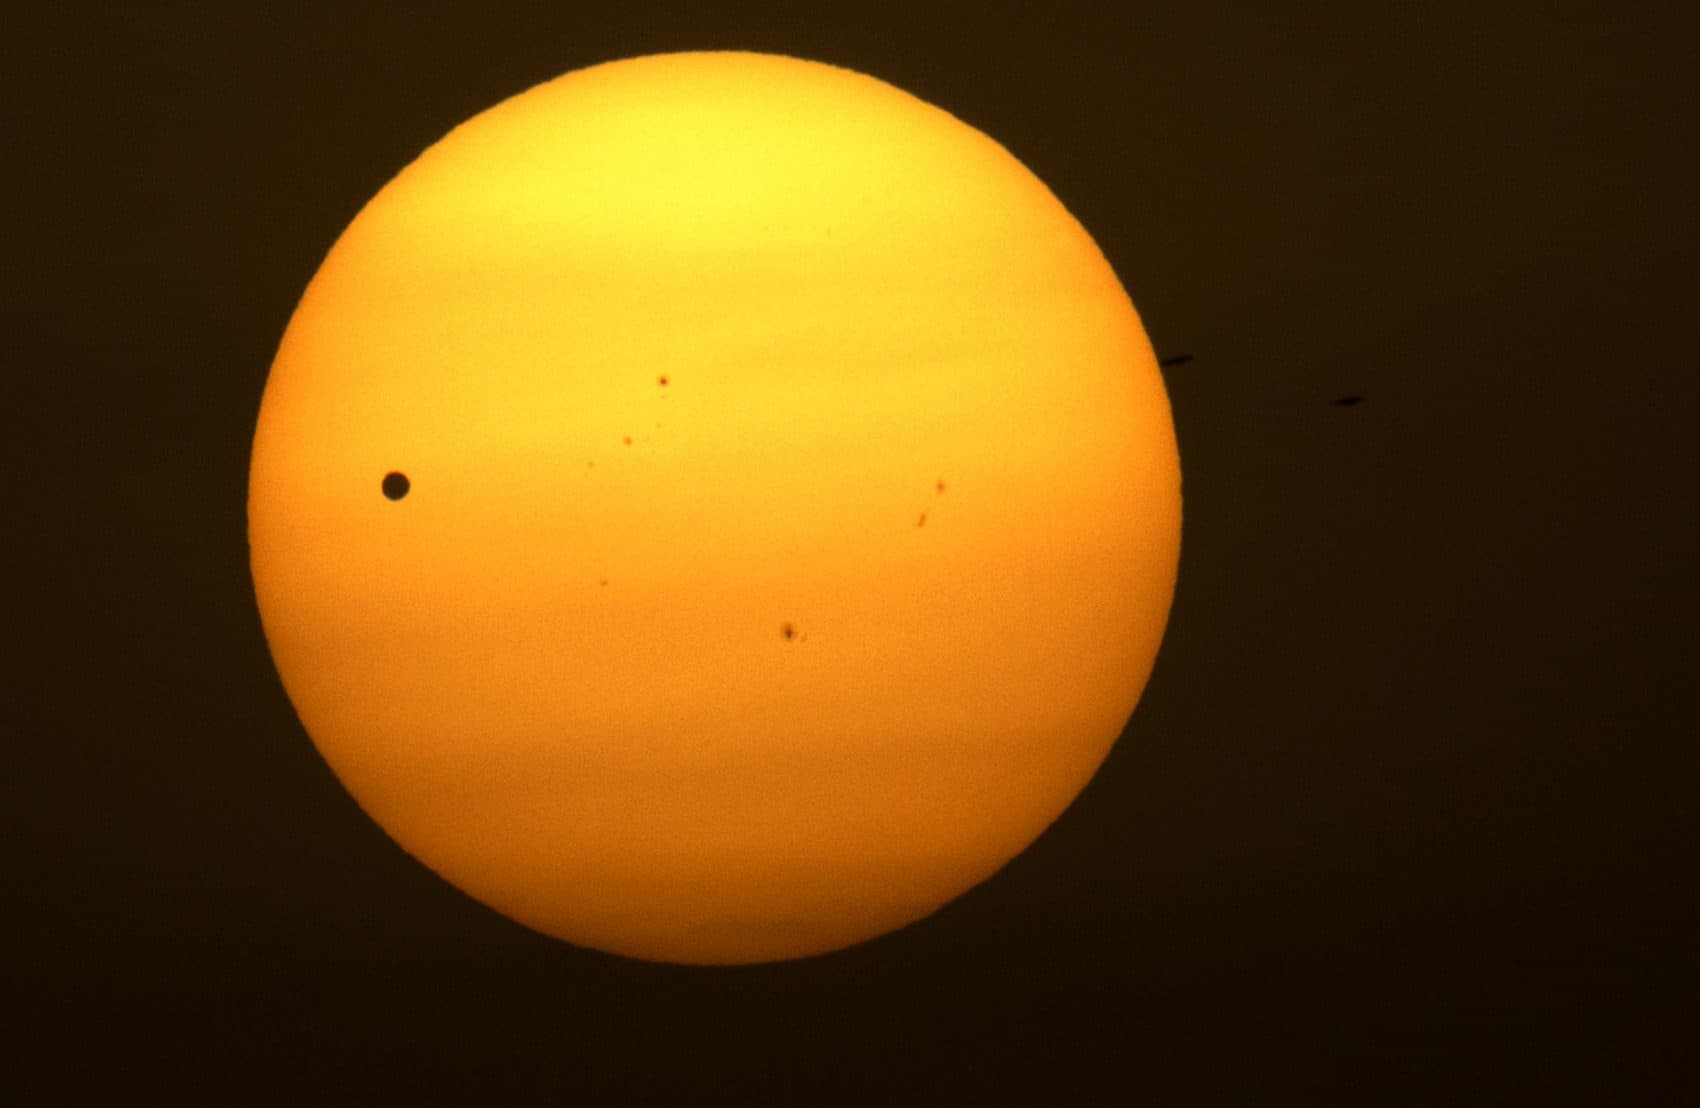 Planet Venus, pictured as a black dot, left, is seen in transit across the sun on the banks of the Ganges River in Varanasi, India, Wednesday, June 6, 2012. (Rajesh Kumar Singh/AP)